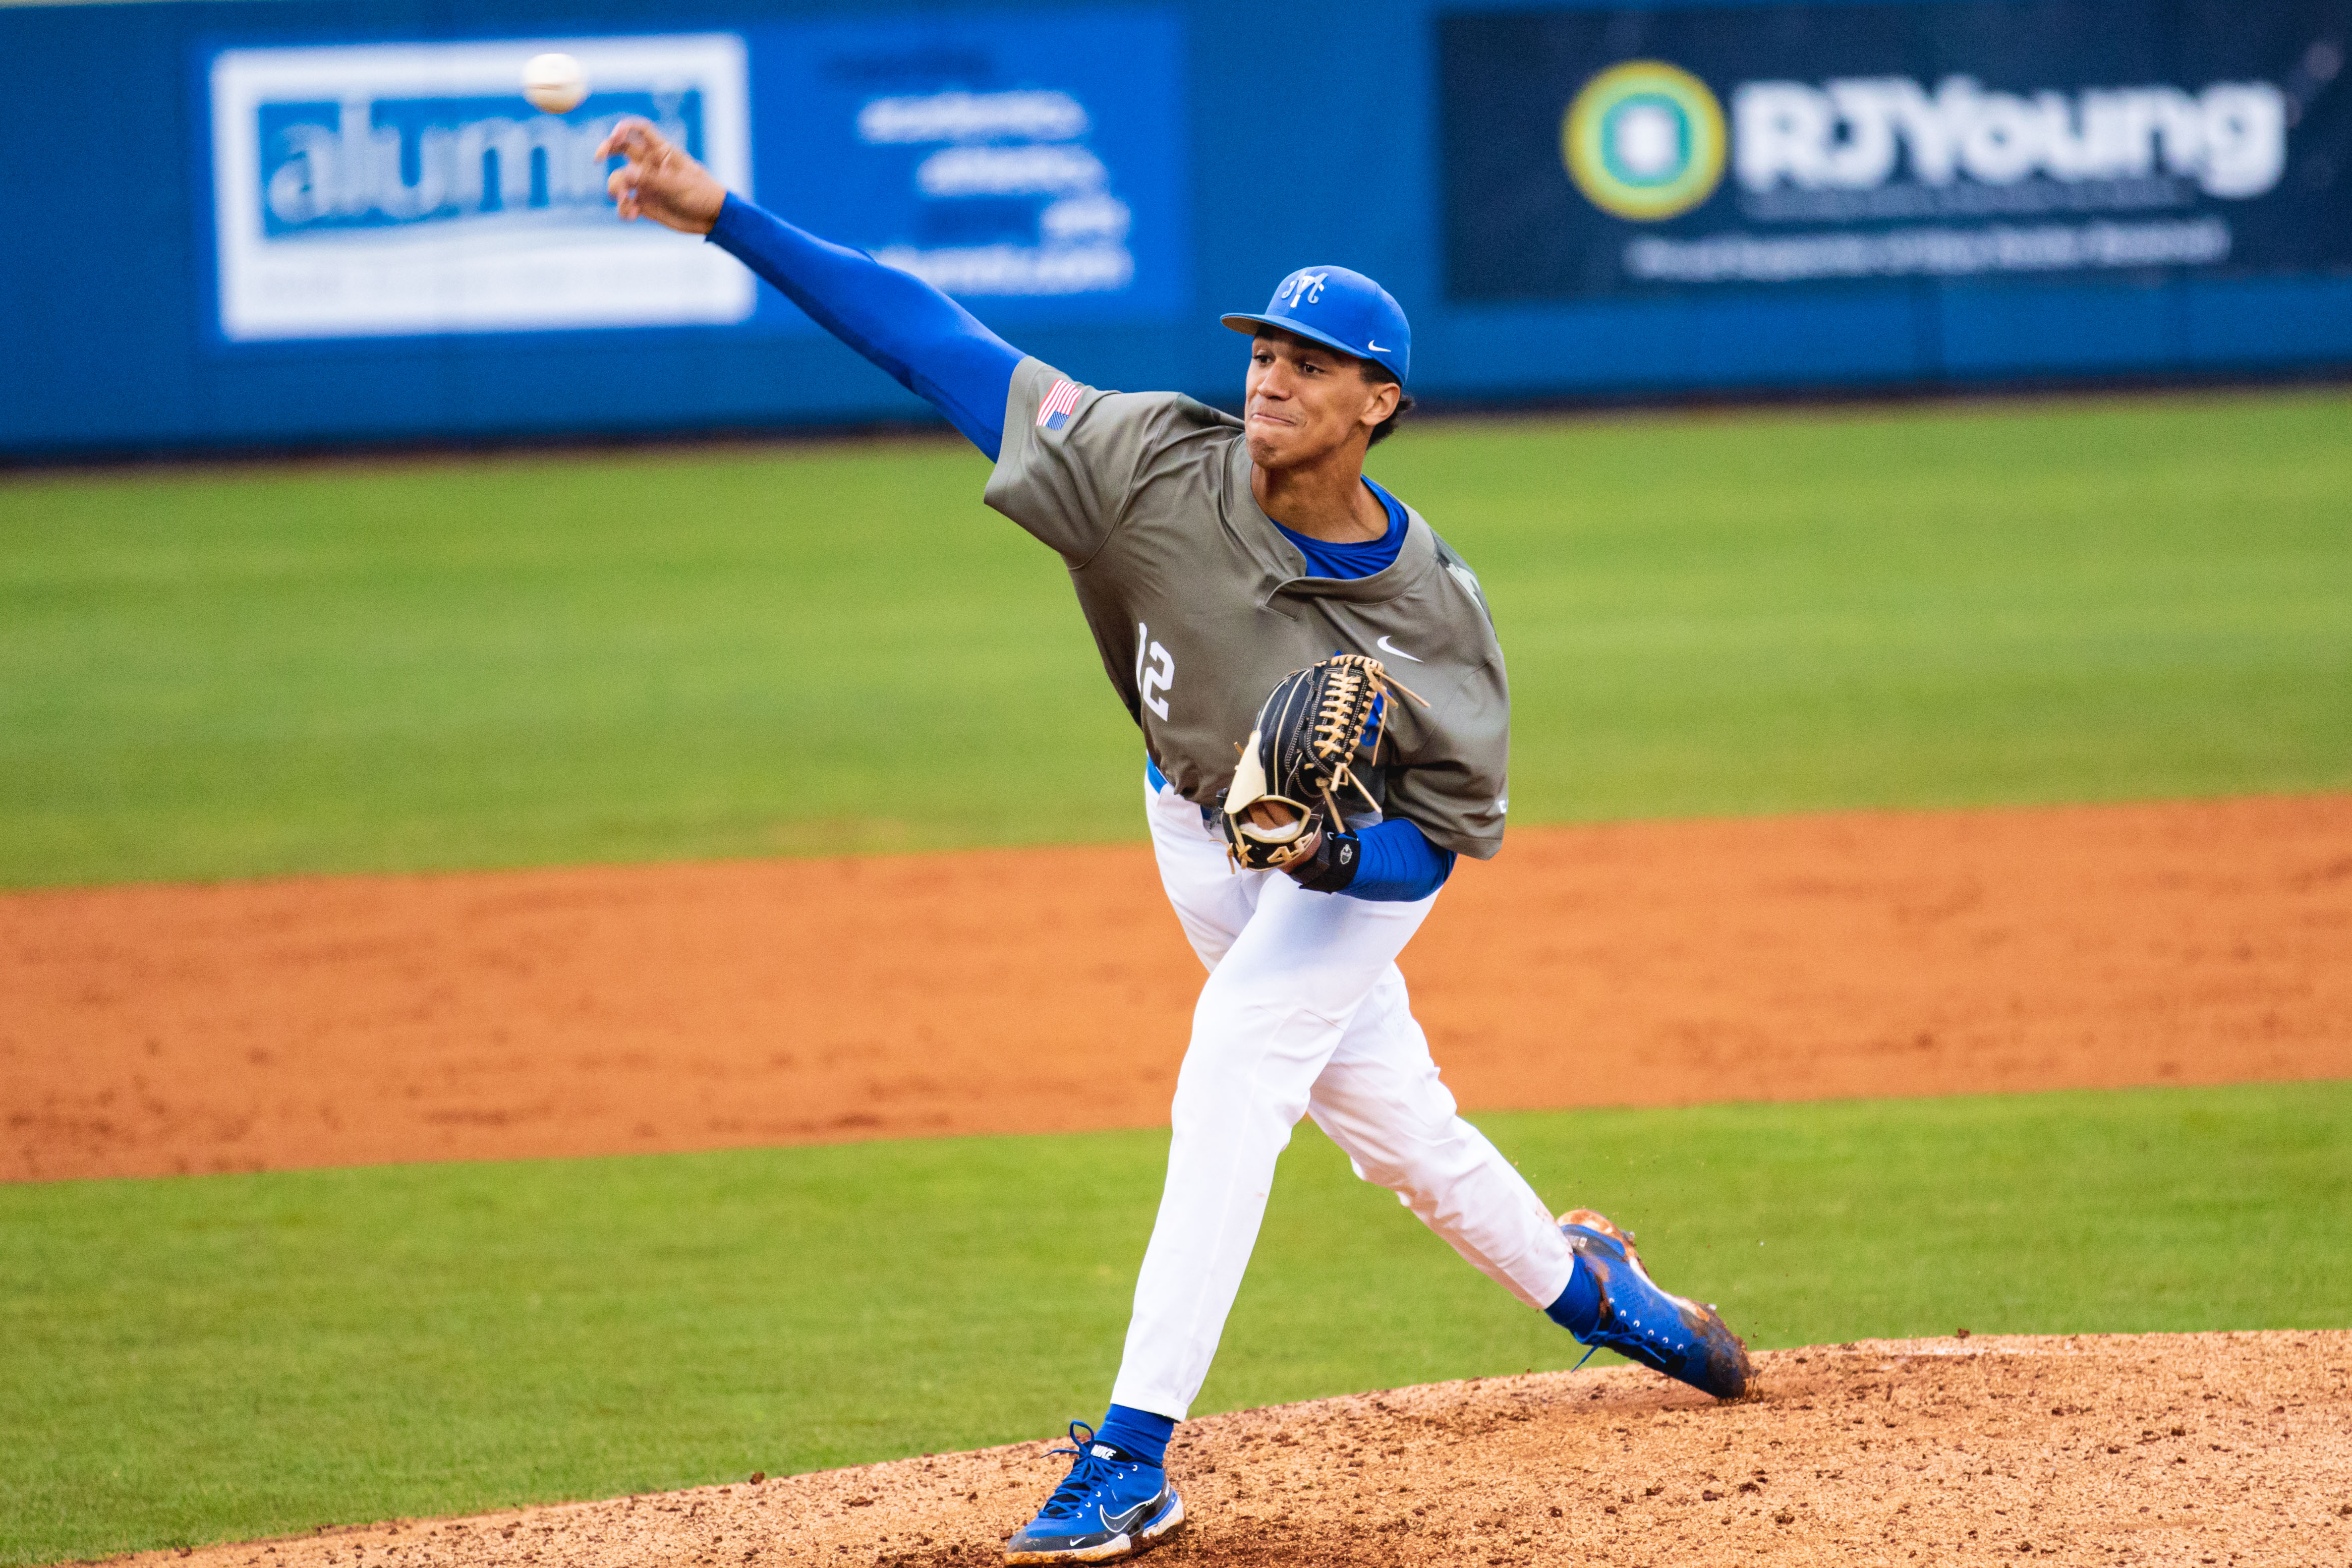 The Dodgers drafted Middle Tennessee State right-hander Eriq Swan with the 137th overall pick in the 2023 MLB Draft, just after the fourth round.